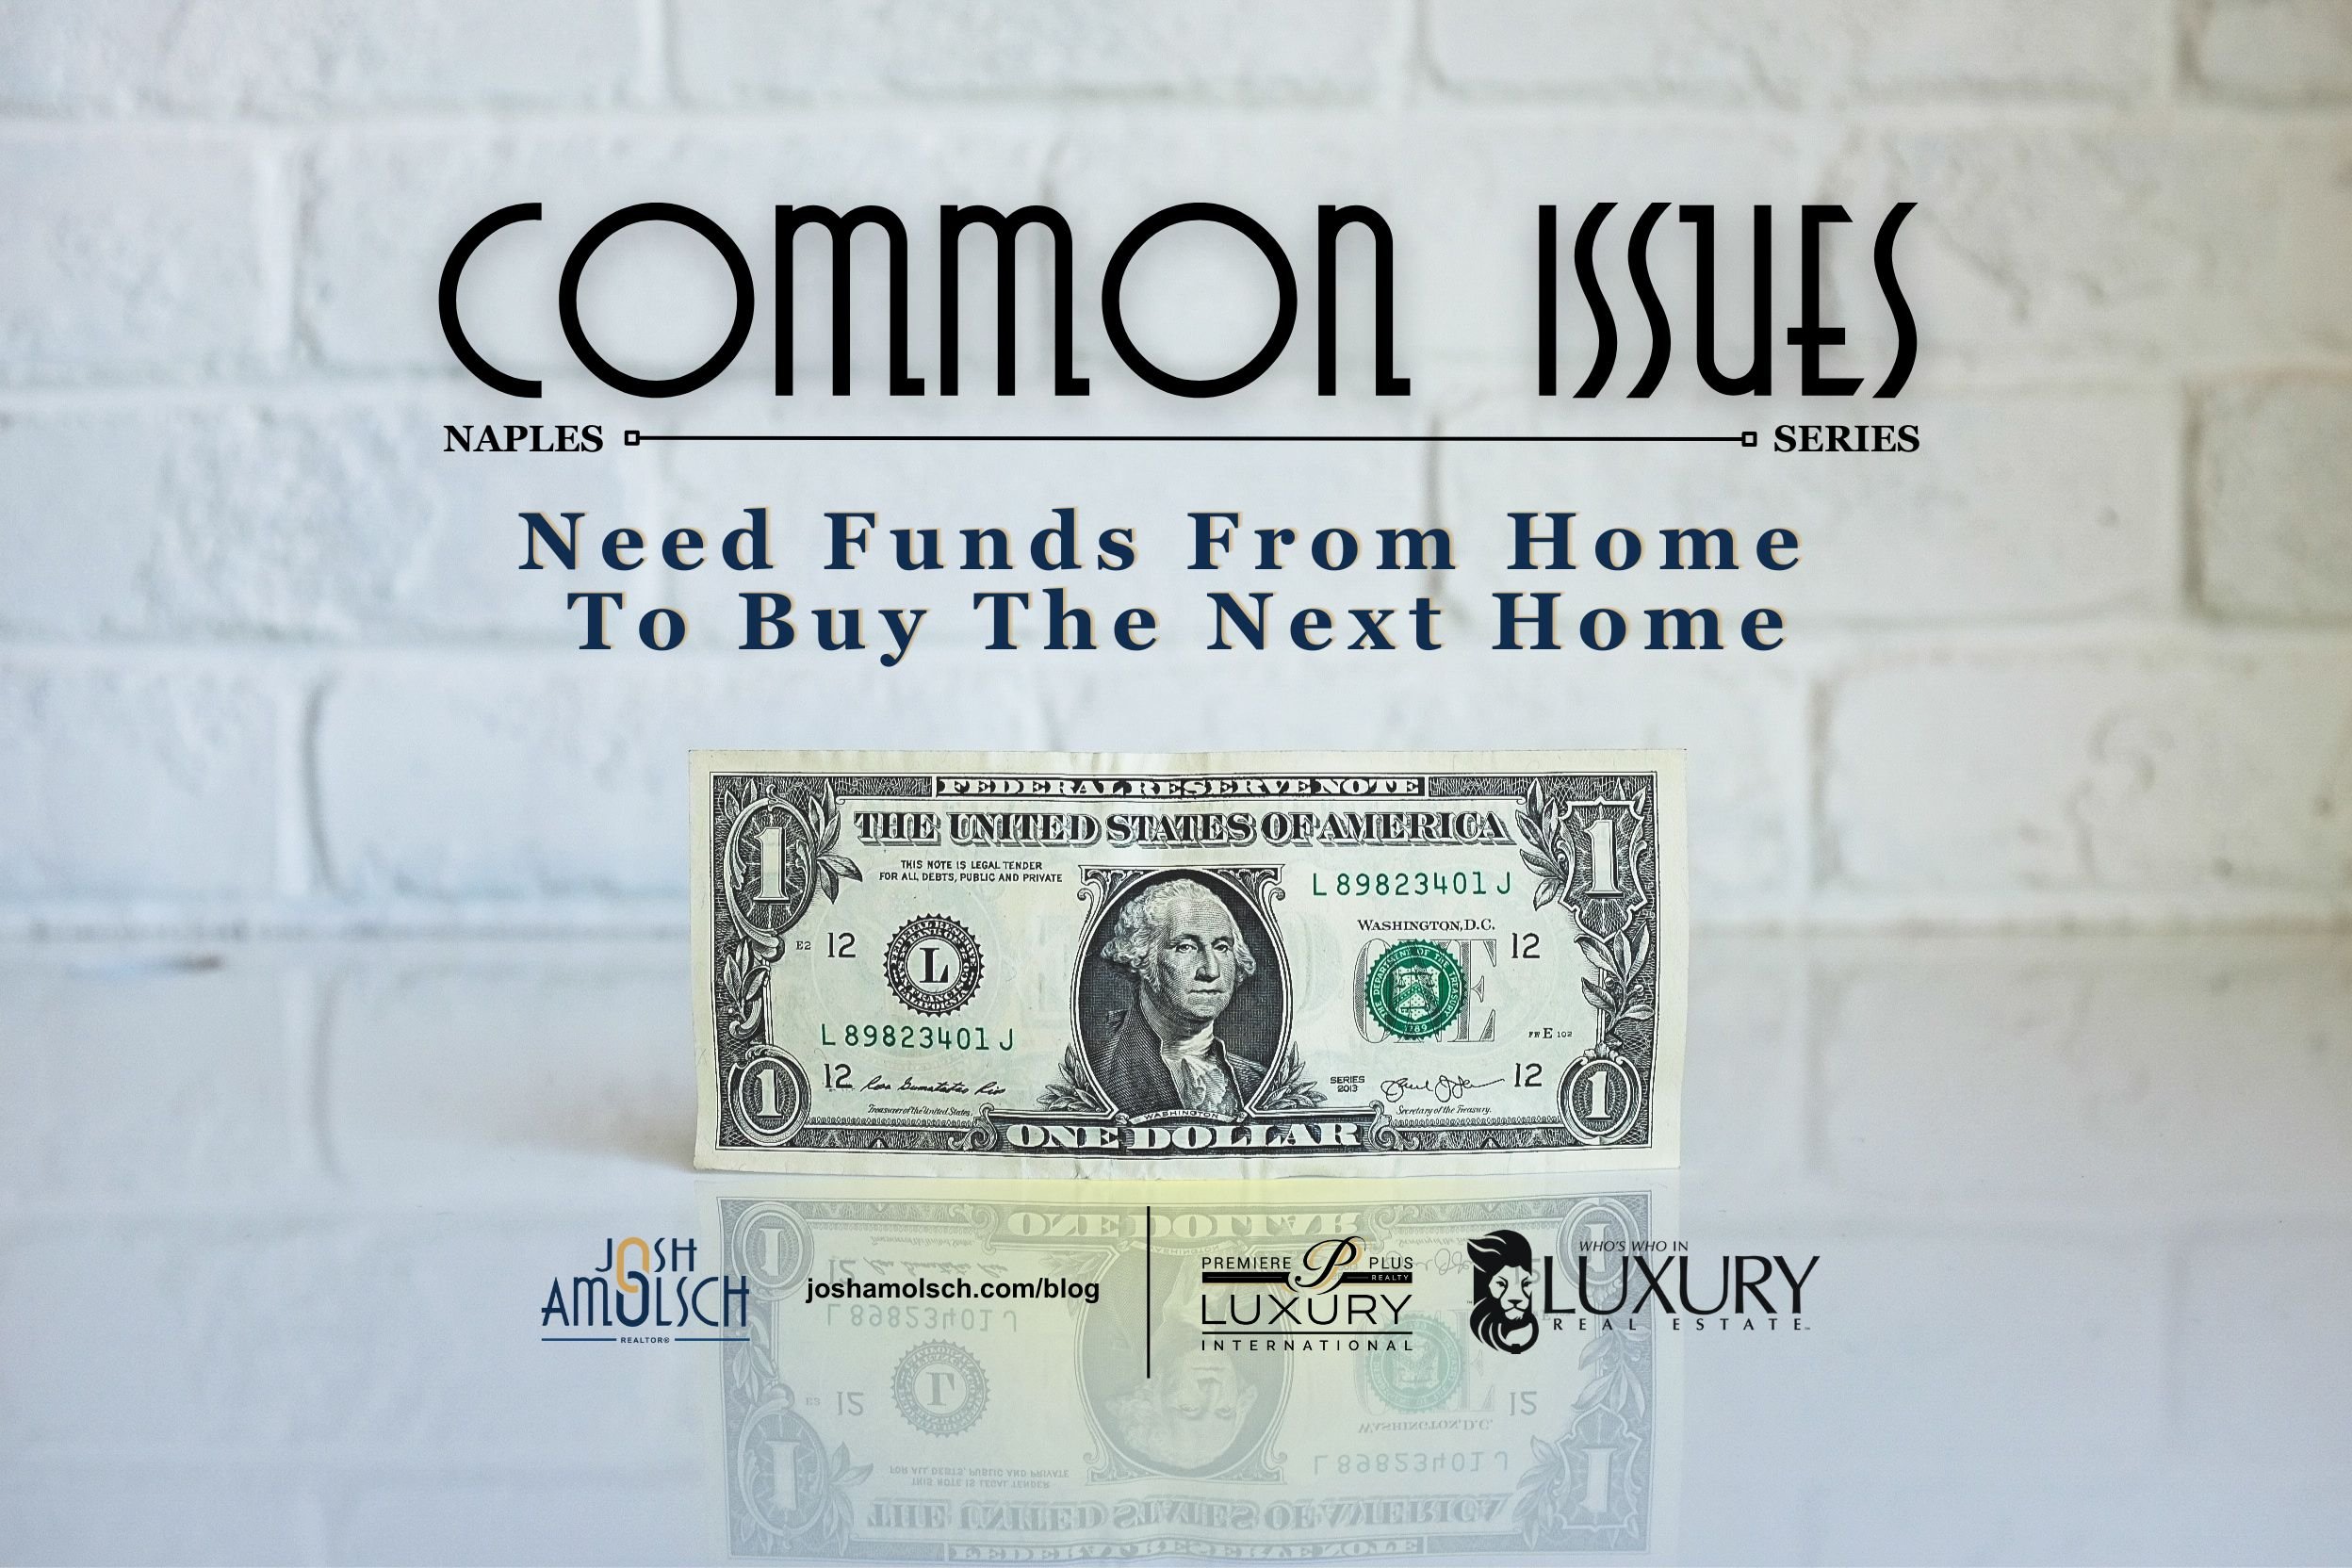 Naples Common Issues: Need Funds From Home to Buy Next Home